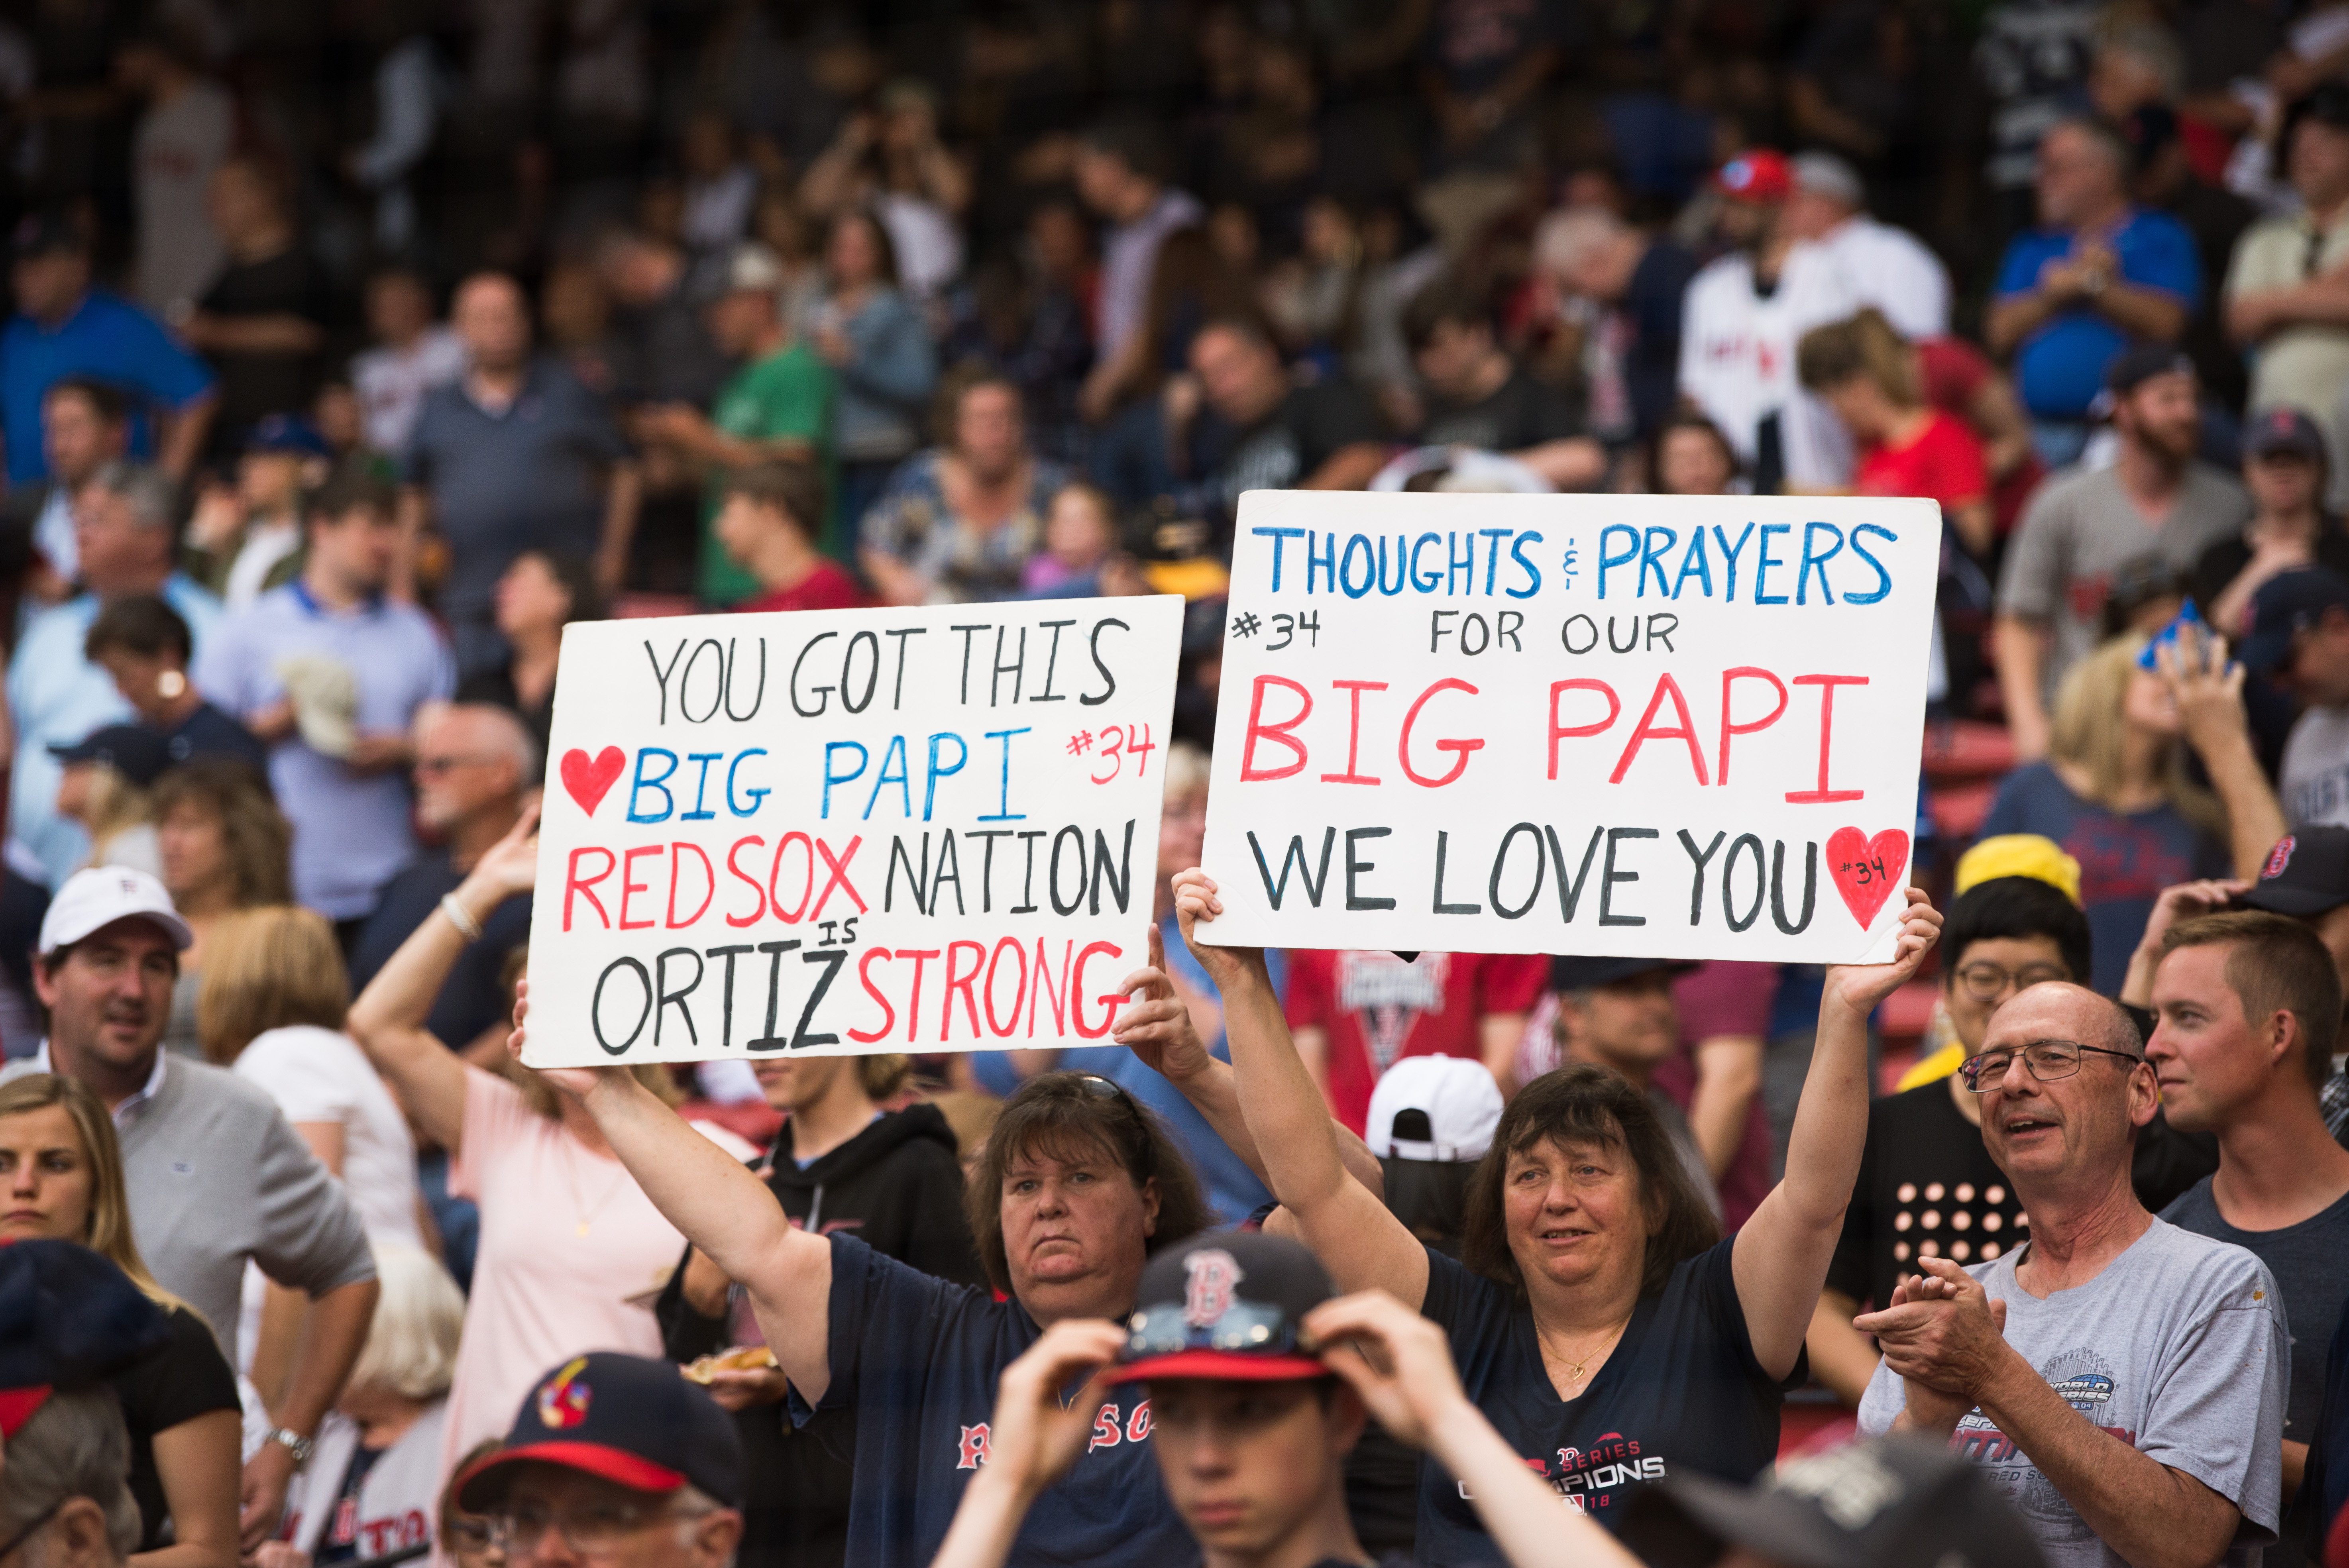 Fans hold up signs showing support for former Red Sox player David Ortiz prior to the start of the game against the Texas Rangers at Fenway Park on June 10, 2019 in Boston, Massachusetts. (Photo by Kathryn Riley /Getty Images)